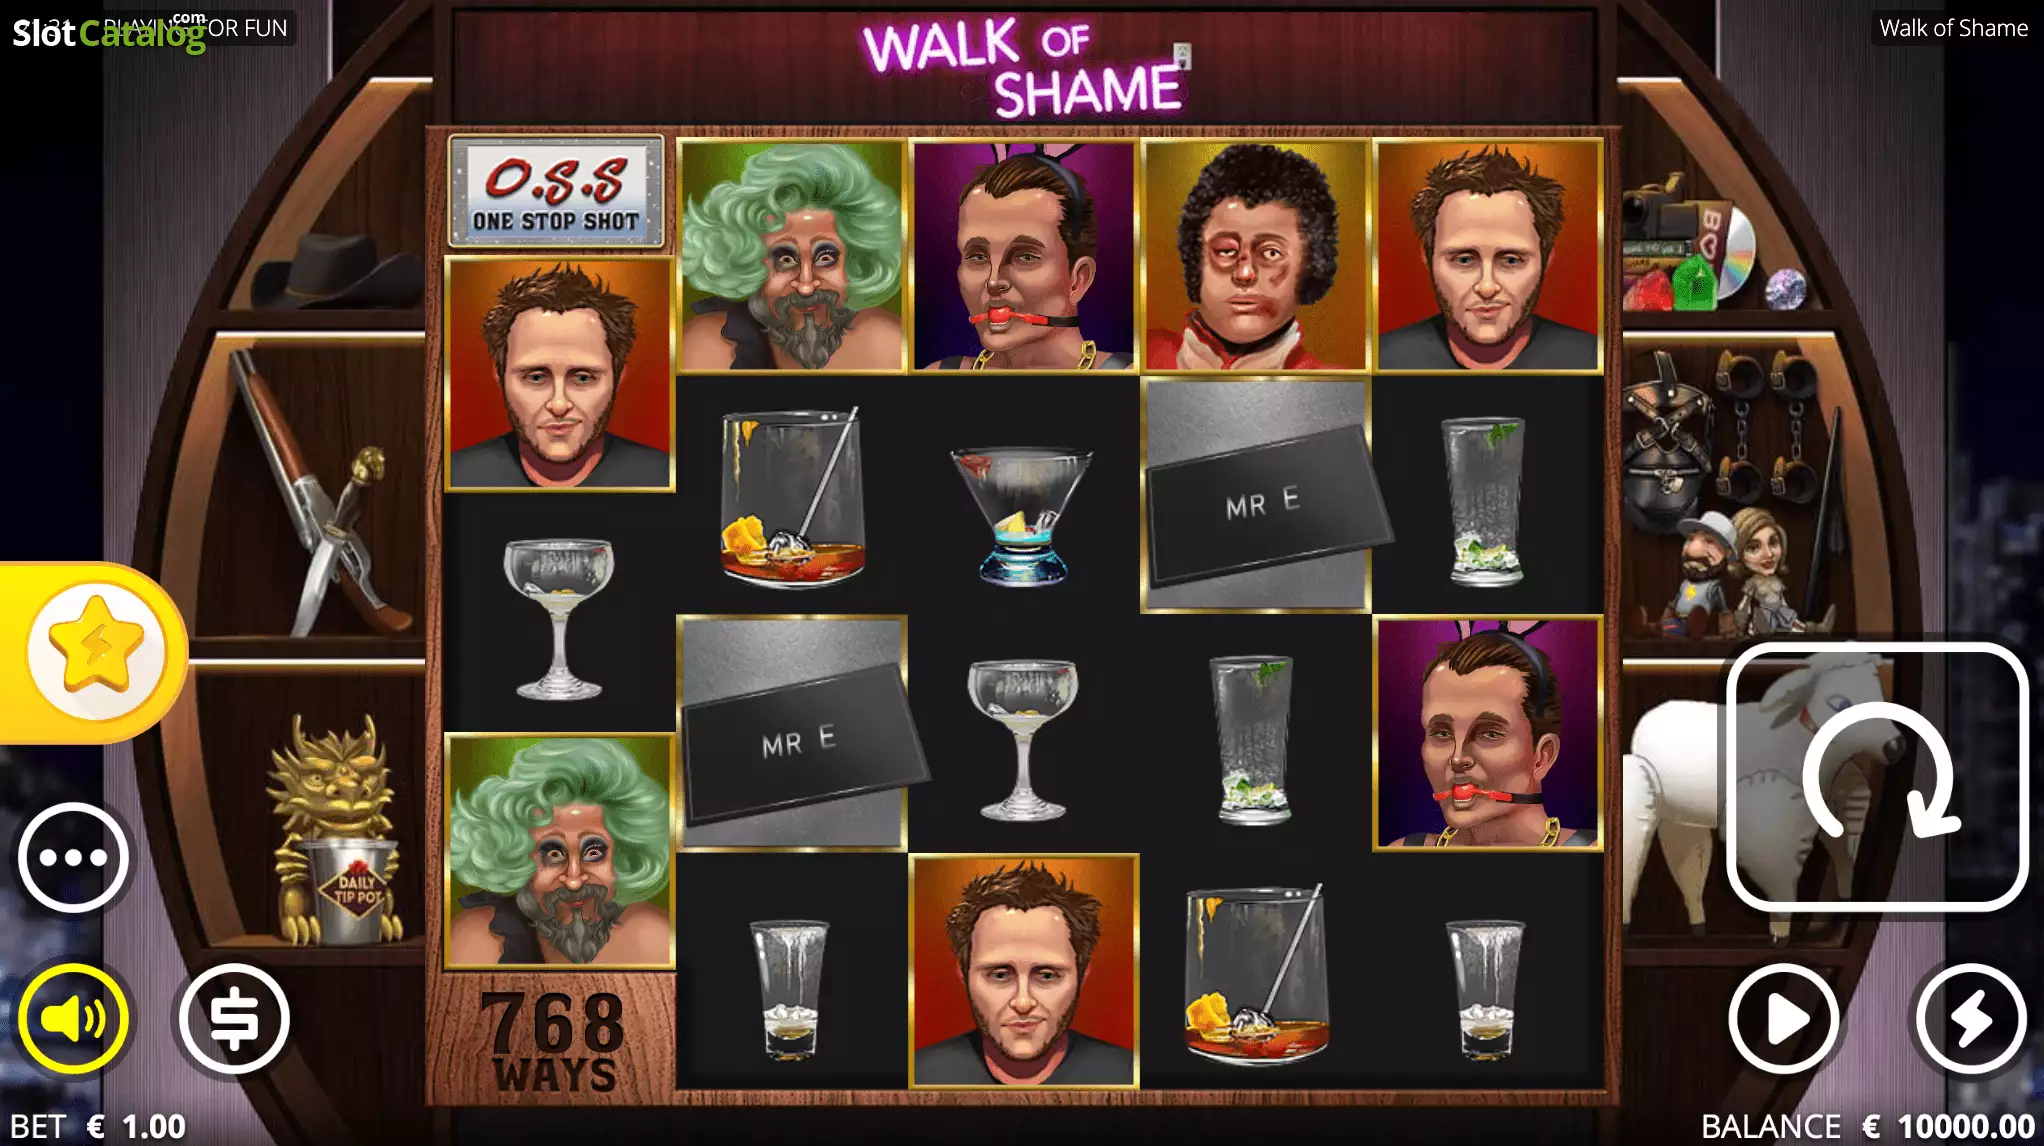 Try Walk of Shame Demo Game and Check Our Slot Review